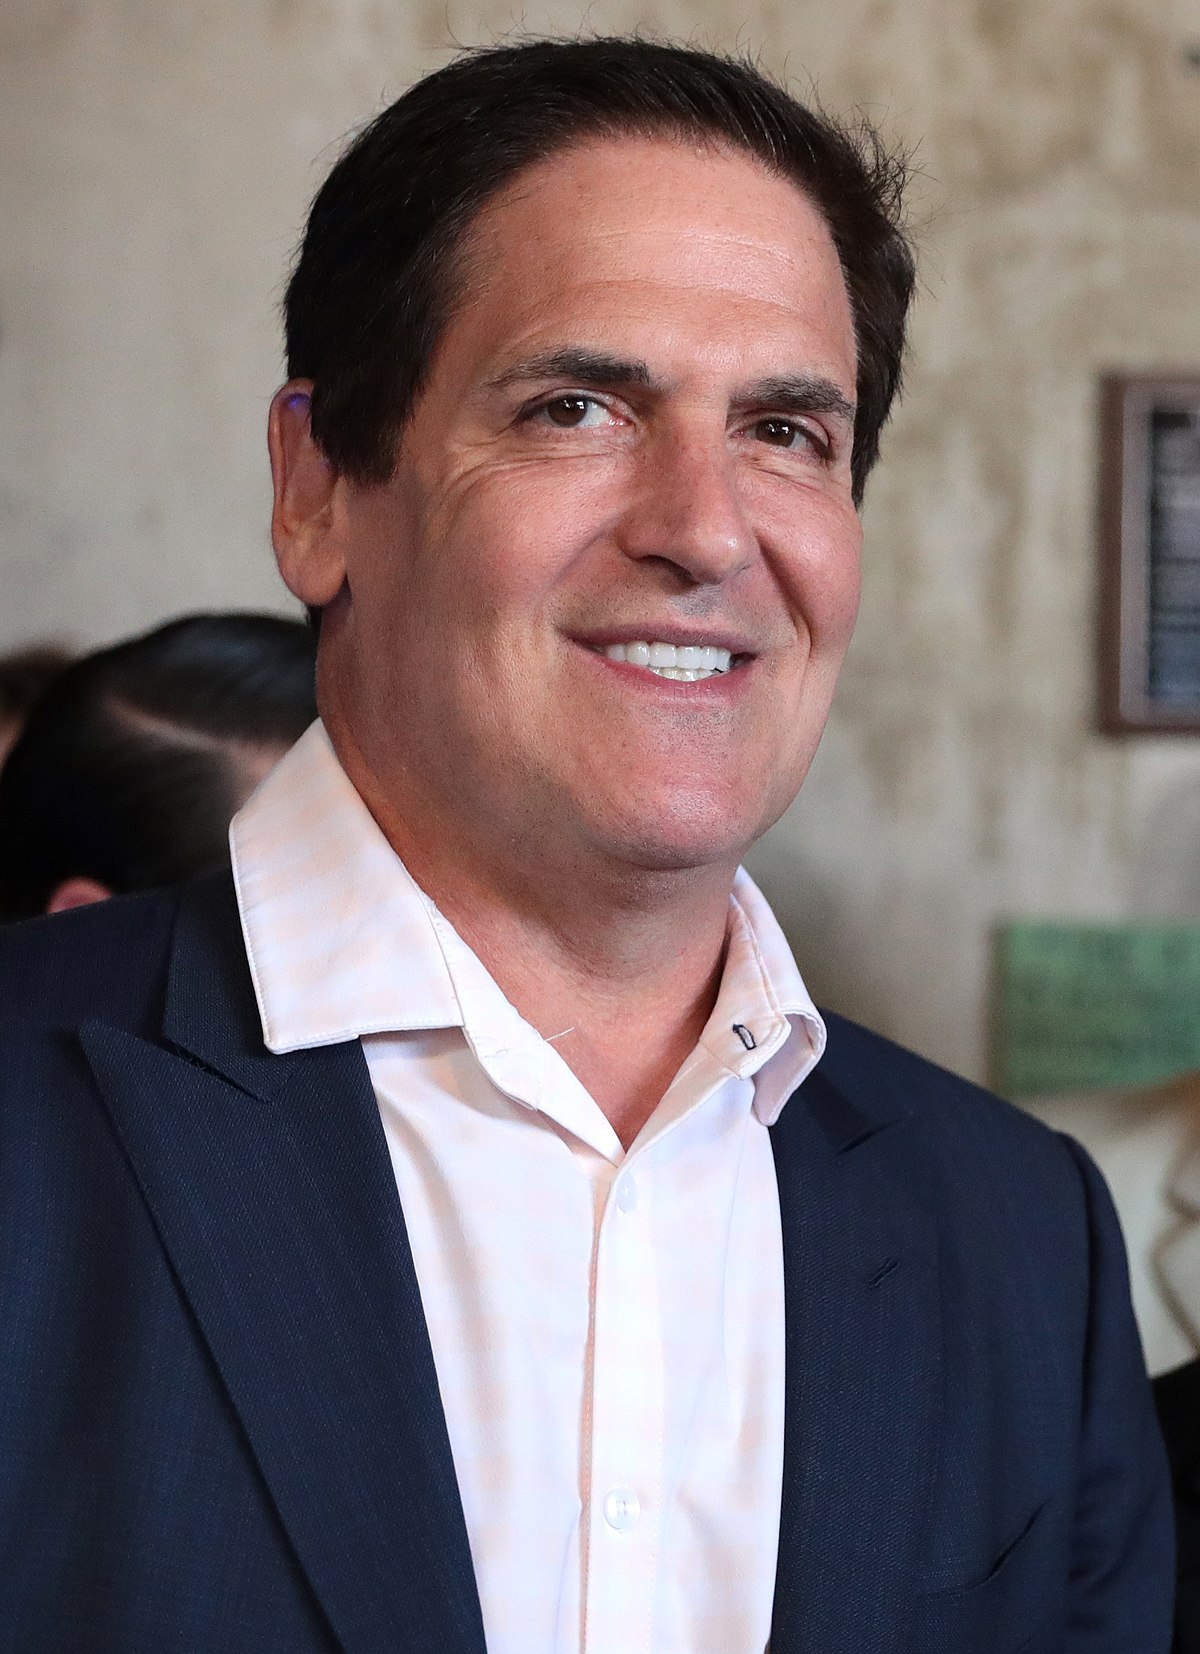 NFT genius announces their premier event, the NFT experience is back this time with Mark Cuban